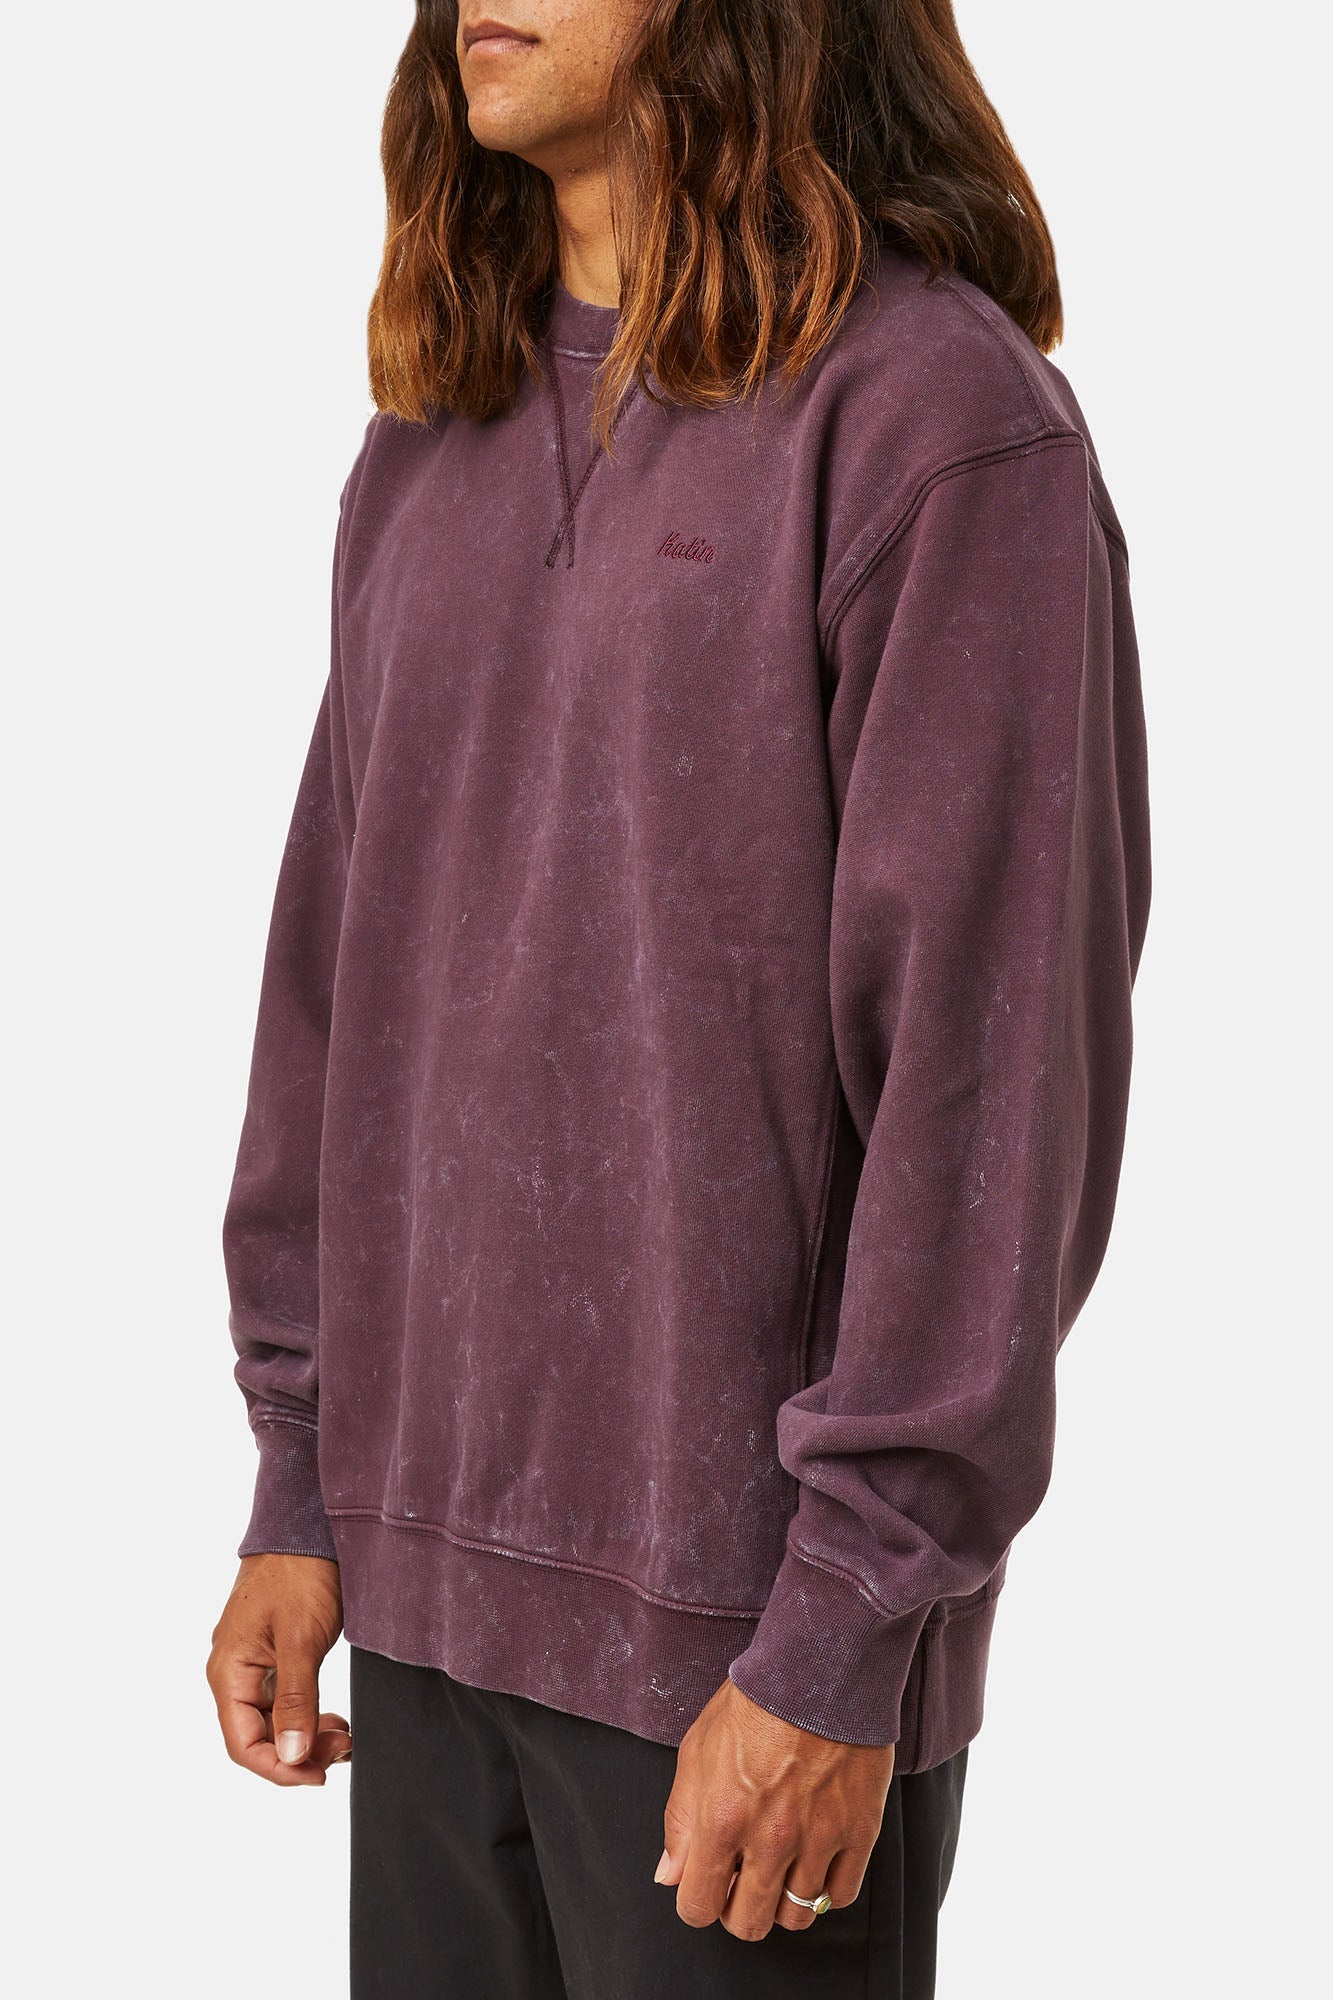 Katin Embroidered Solid Crew Neck Sweatshirt - Kelp red Mineral